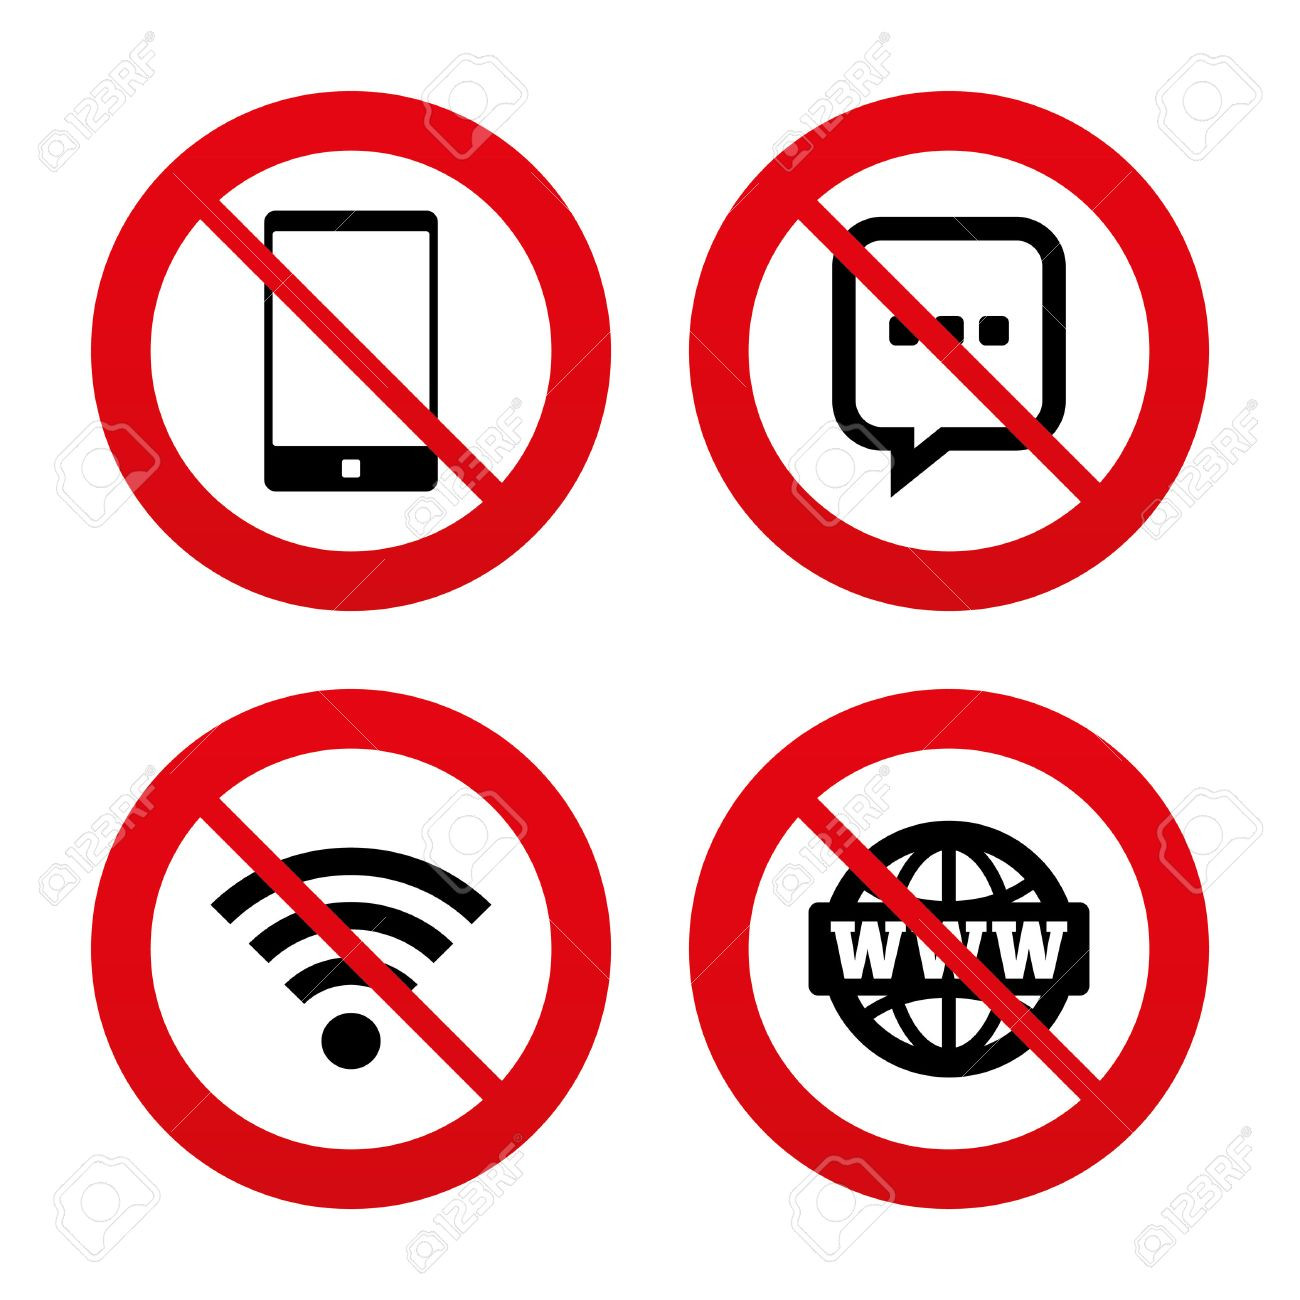 40791467-no-ban-or-stop-signs-communication-icons-smartphone-and-chat-speech-bubble-symbols-wi...jpg